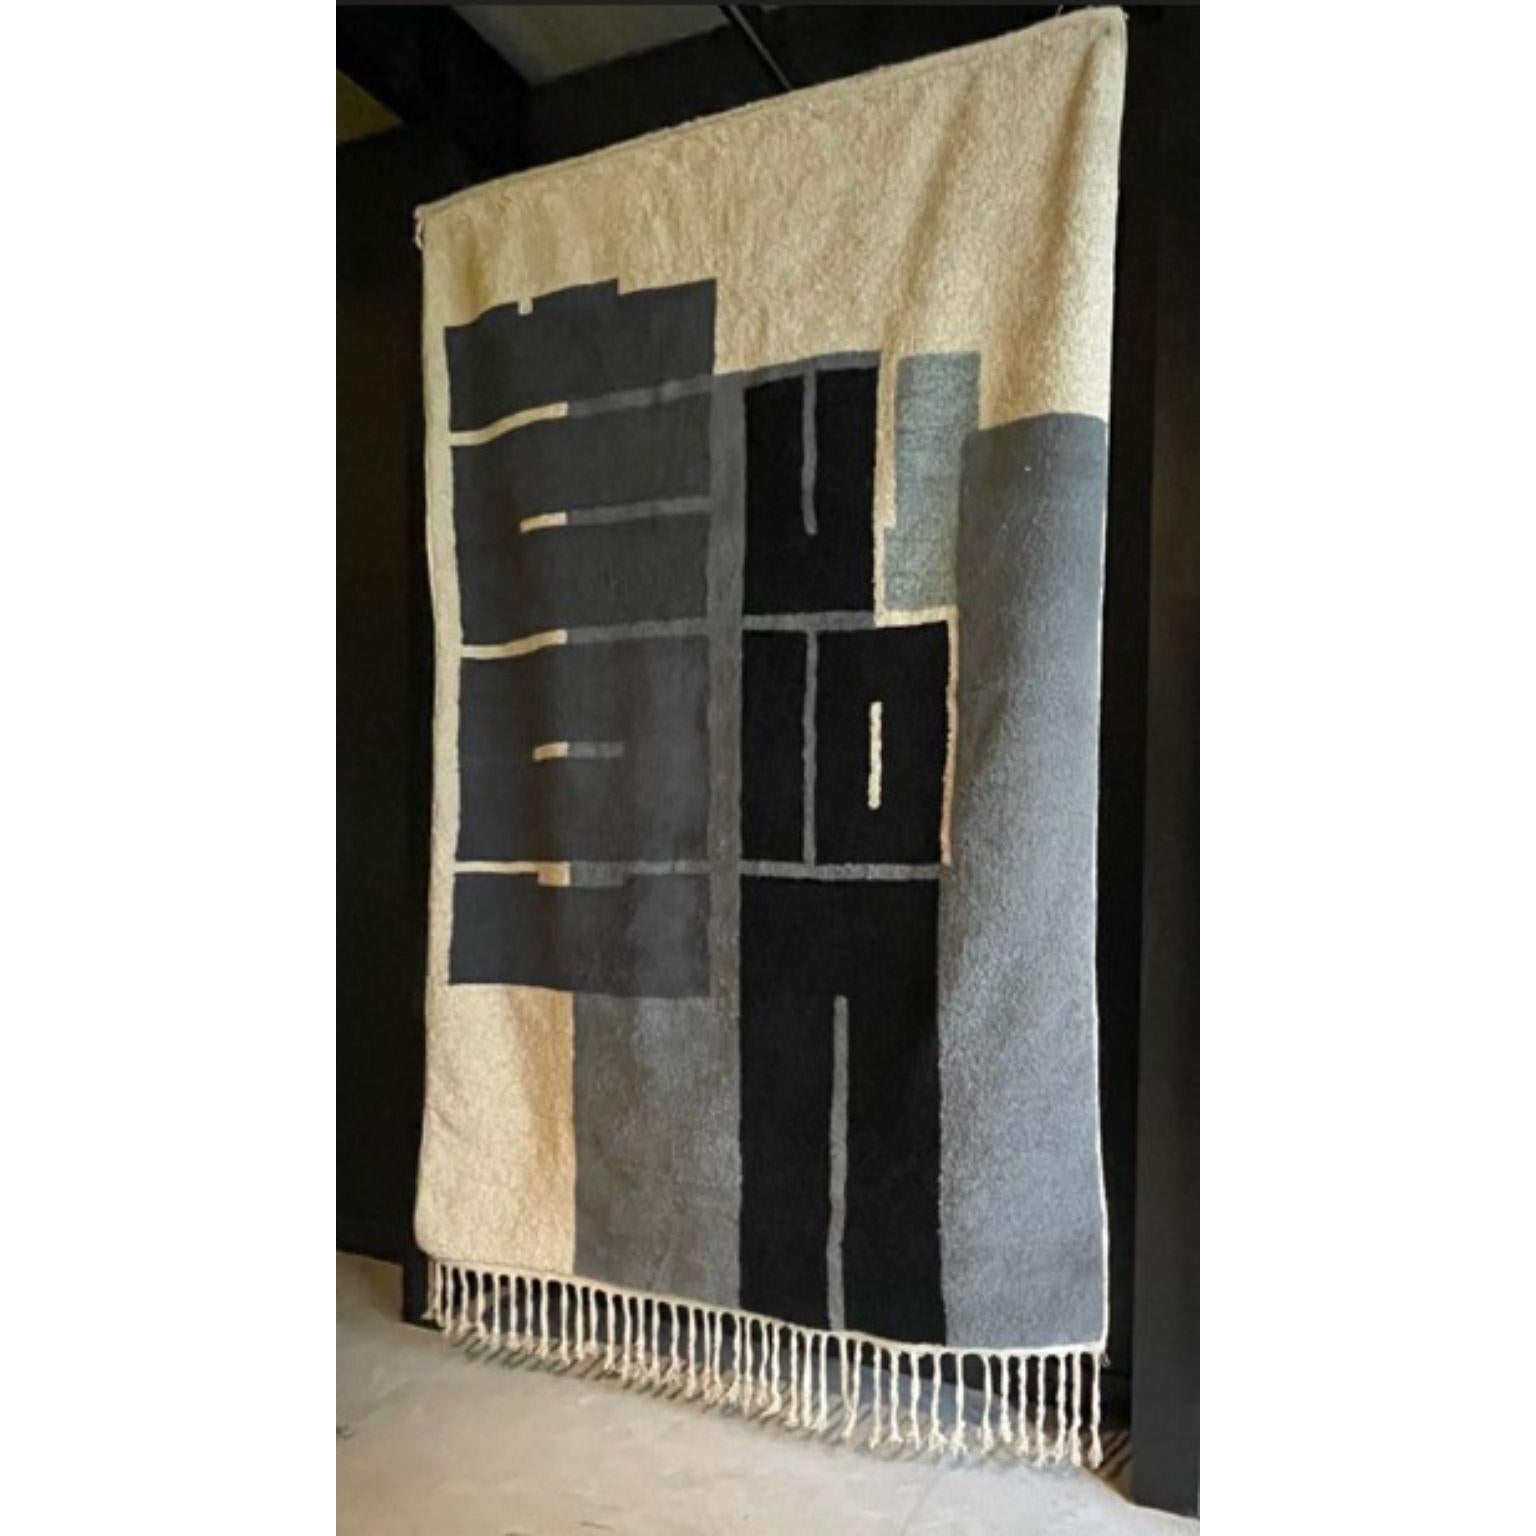 Fluidity Confusion Rug by Geke Lensink
Dimensions: D205 x H300 cm 
Materials: berber carpet, wool and handmade in Morocco 

After graduating from ArtEZ University of the Arts, Geke Lensink started working as an independent interior designer,